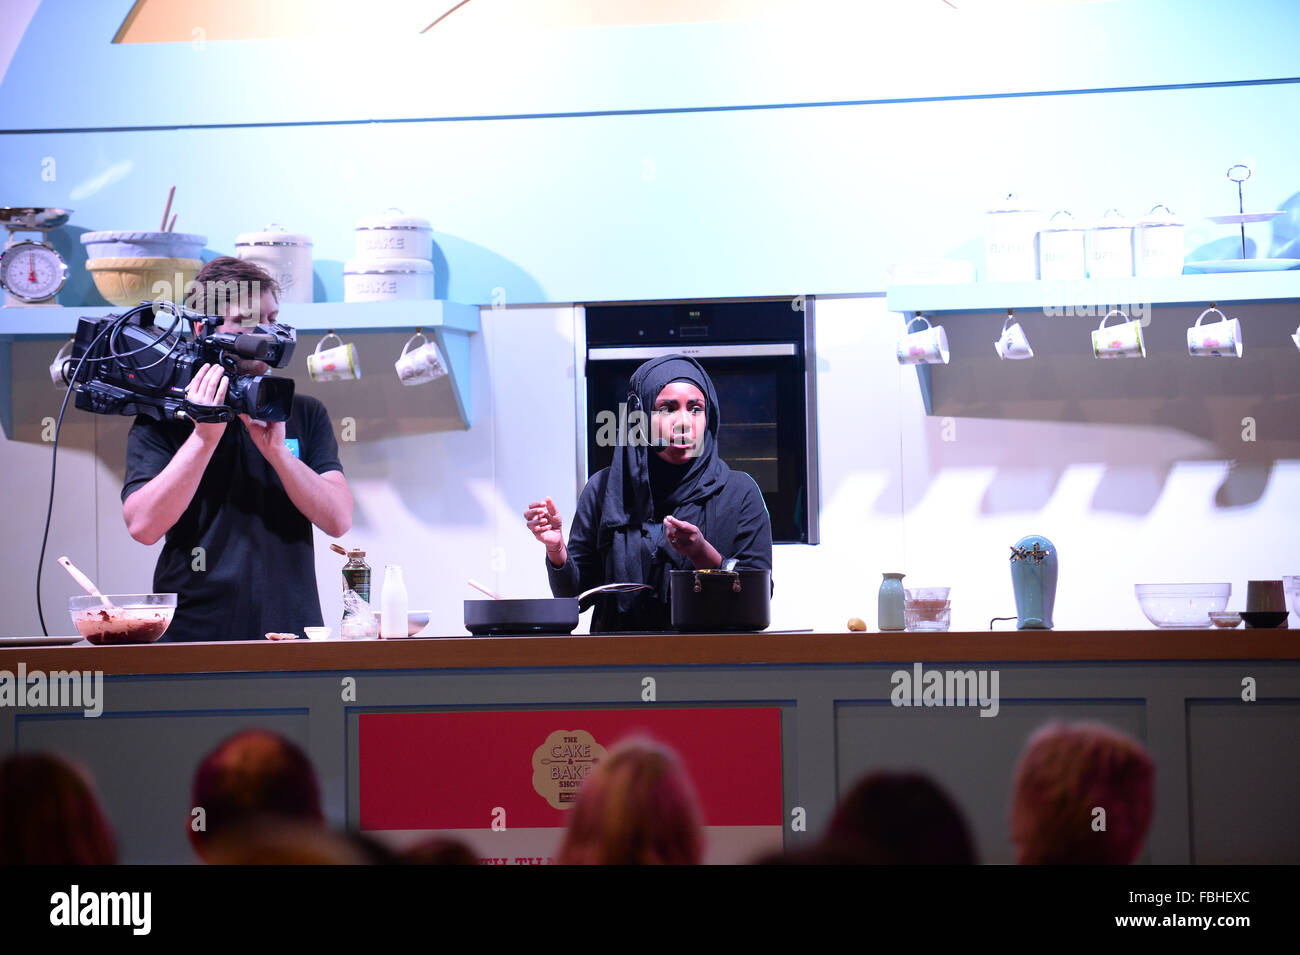 Nadiya Hussain, winner of The Great British Bake Off 2015 takes part in a cookery demonstration at the Cake and Bake Show. Stock Photo